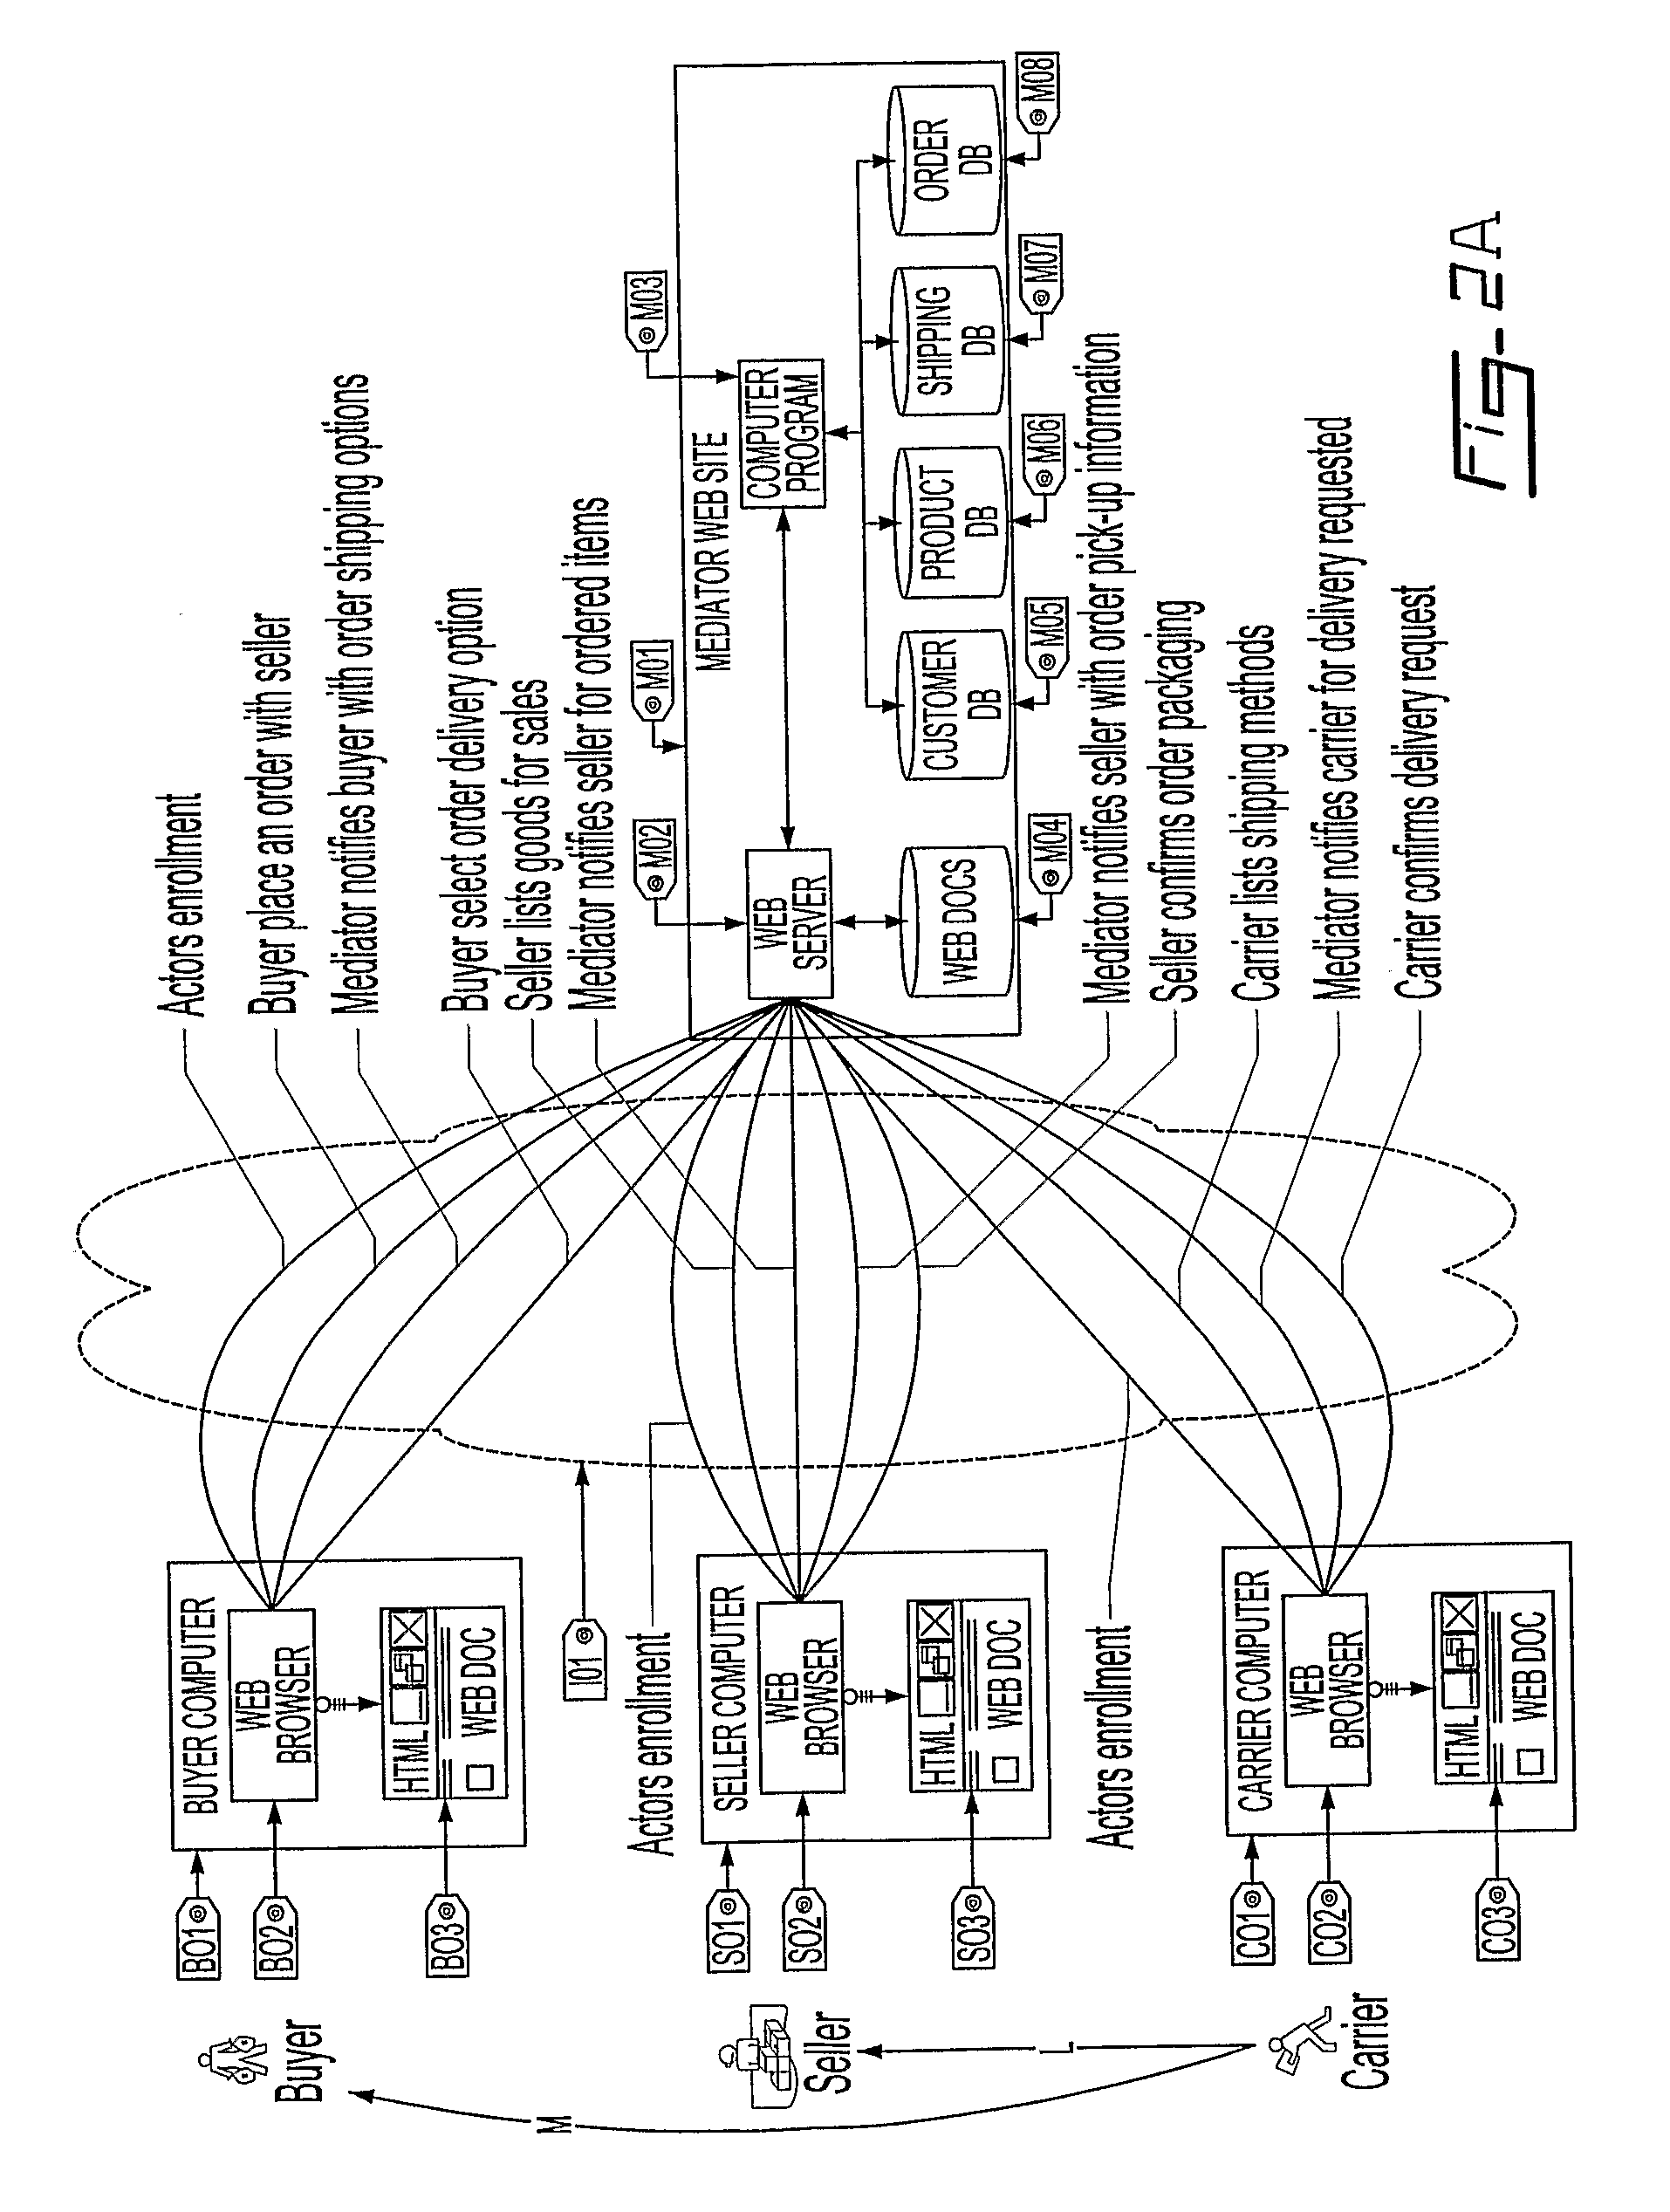 Apparatus for selling shipping services through a mediator's web site